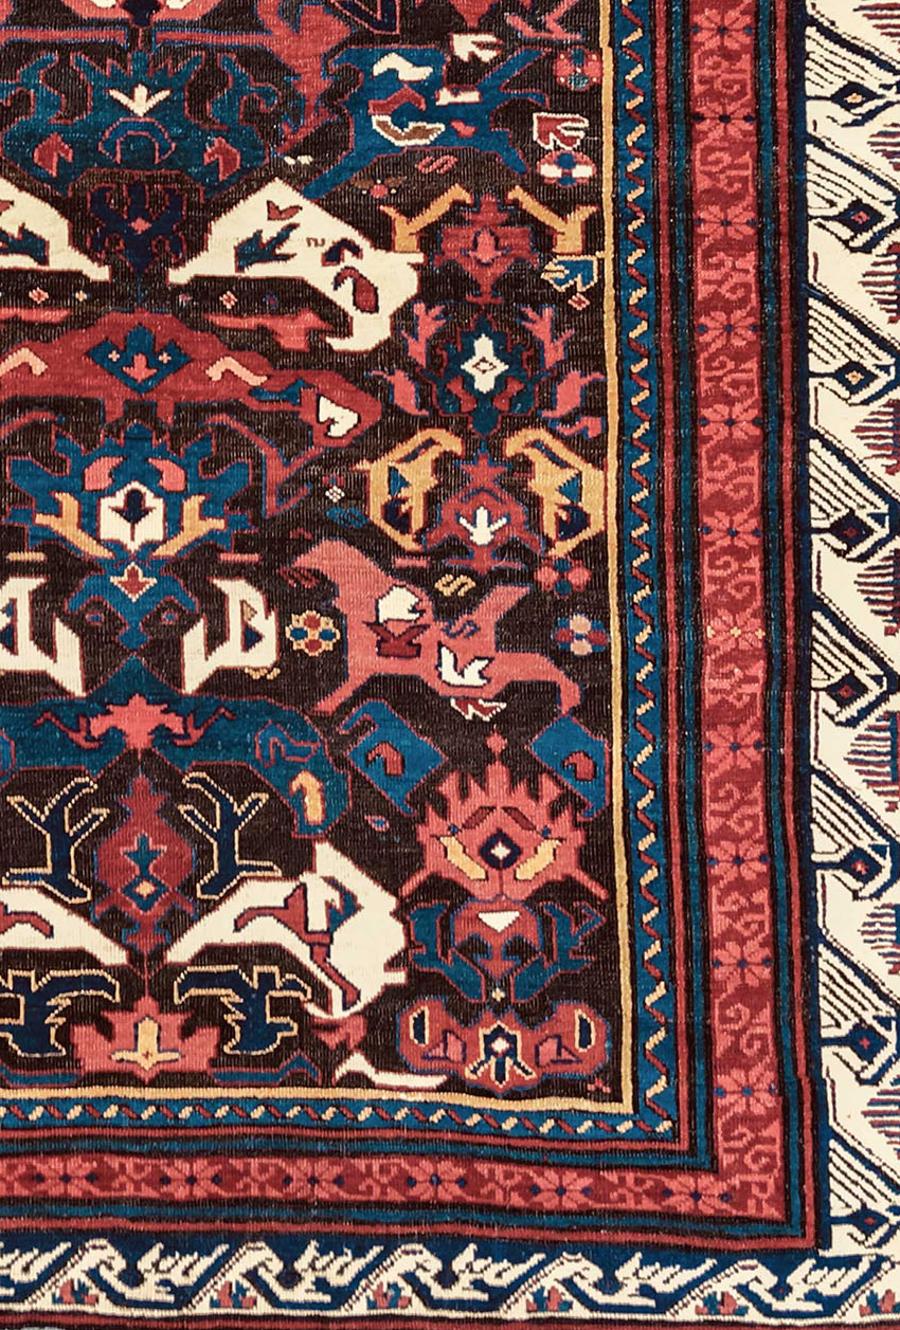 The deep brown oxidized field of this Bidjov Kuba rug from the southeast Caucasus provides the perfect canvas for the various colorful abstract vegetal elements radiating against it. Together these forms combine to create a stylized rendition of the